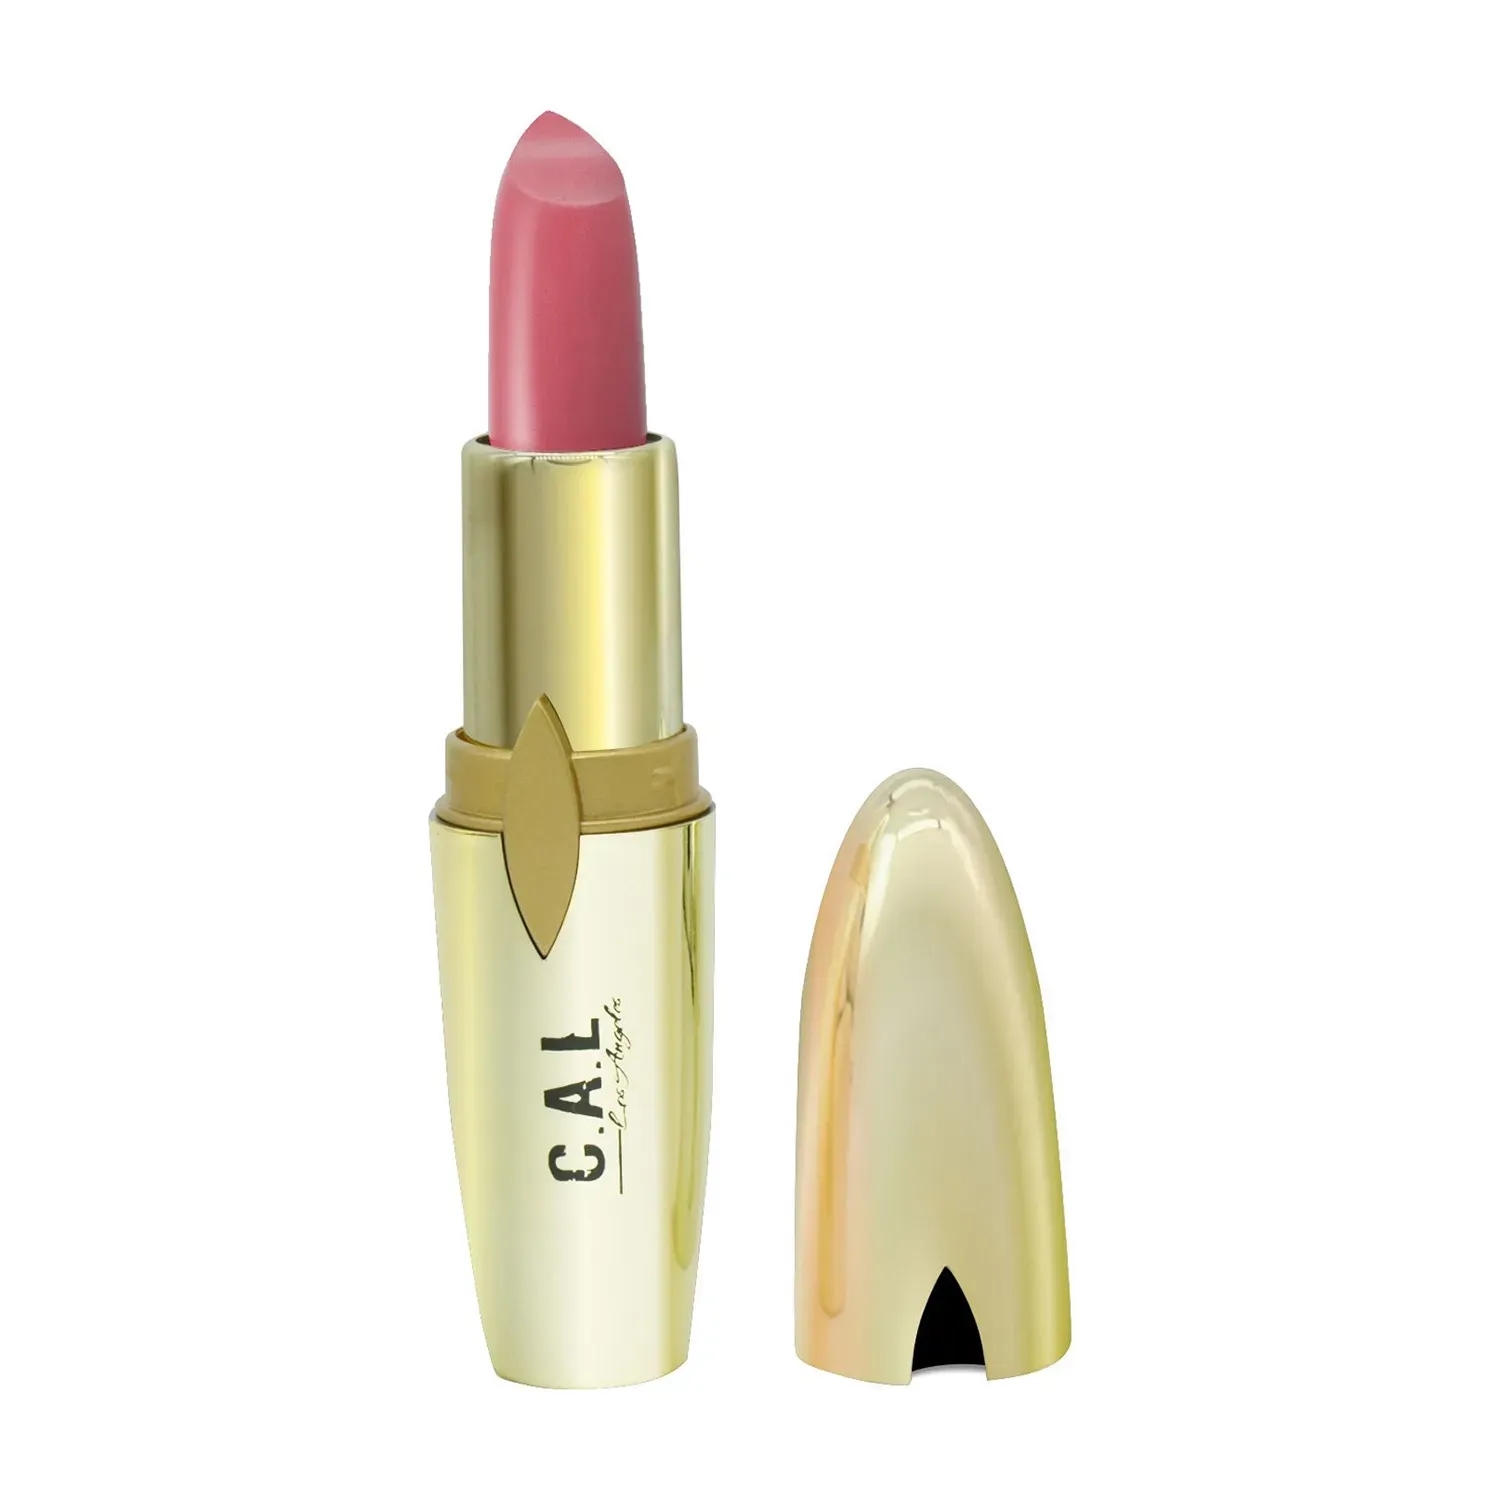 C.A.L Los Angeles | C.A.L Los Angeles Whipped Berries Perfect Pout Lipstick - Whipped Berries (15g)